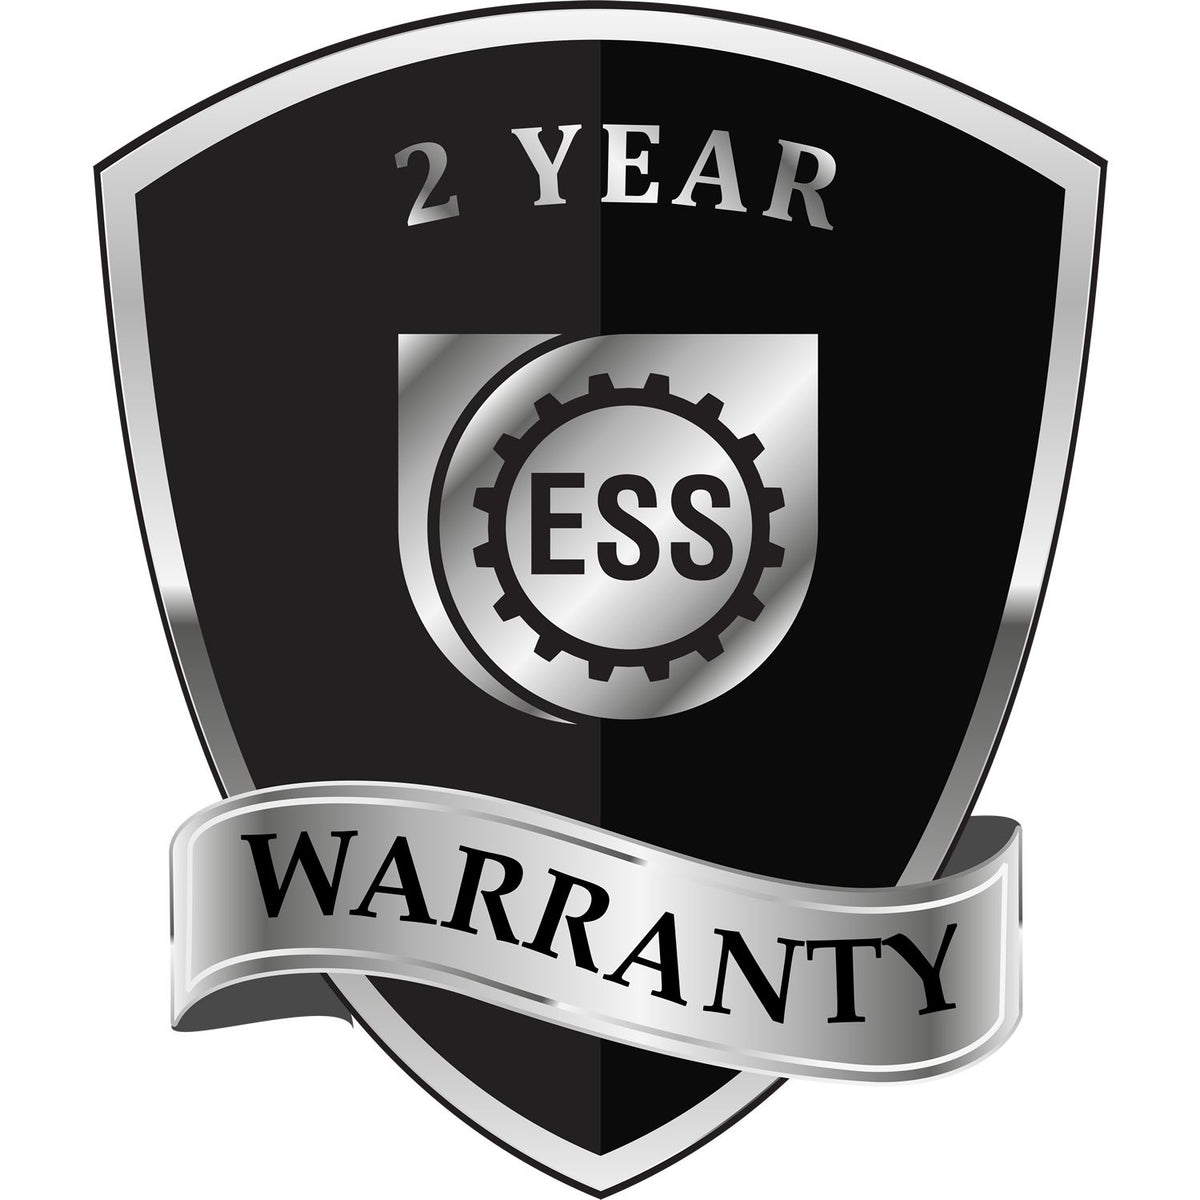 A black and silver badge or emblem showing warranty information for the Soft Wisconsin Professional Geologist Seal